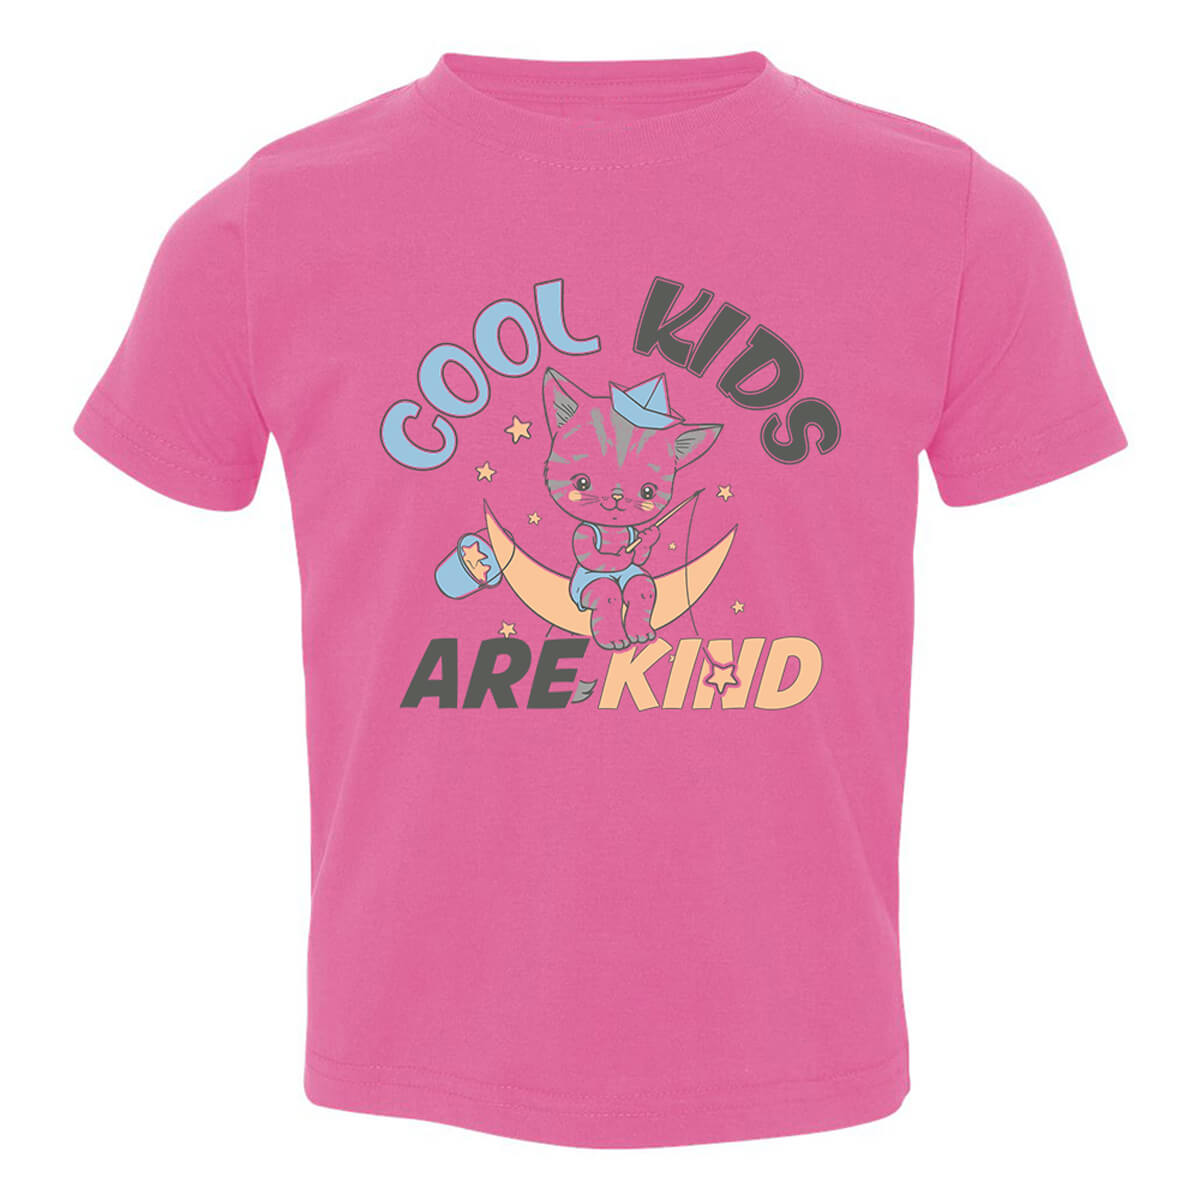 Cool Kids Are Kind Toddler T Shirt